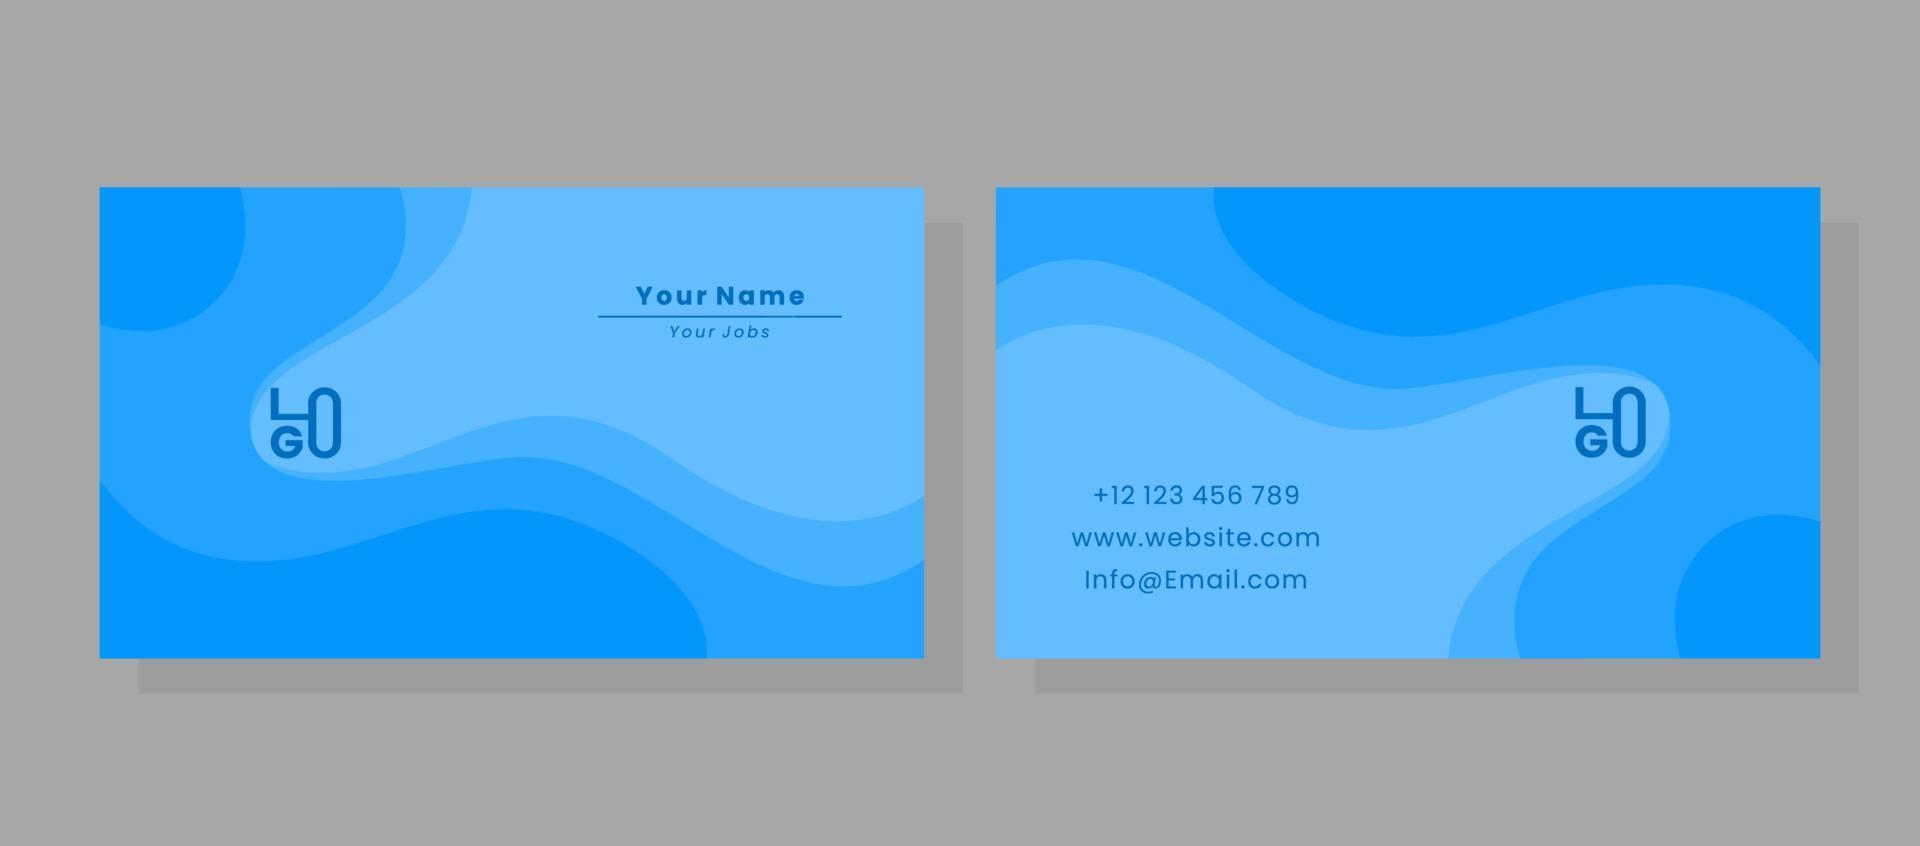 vector illustration business card template in blue color for company